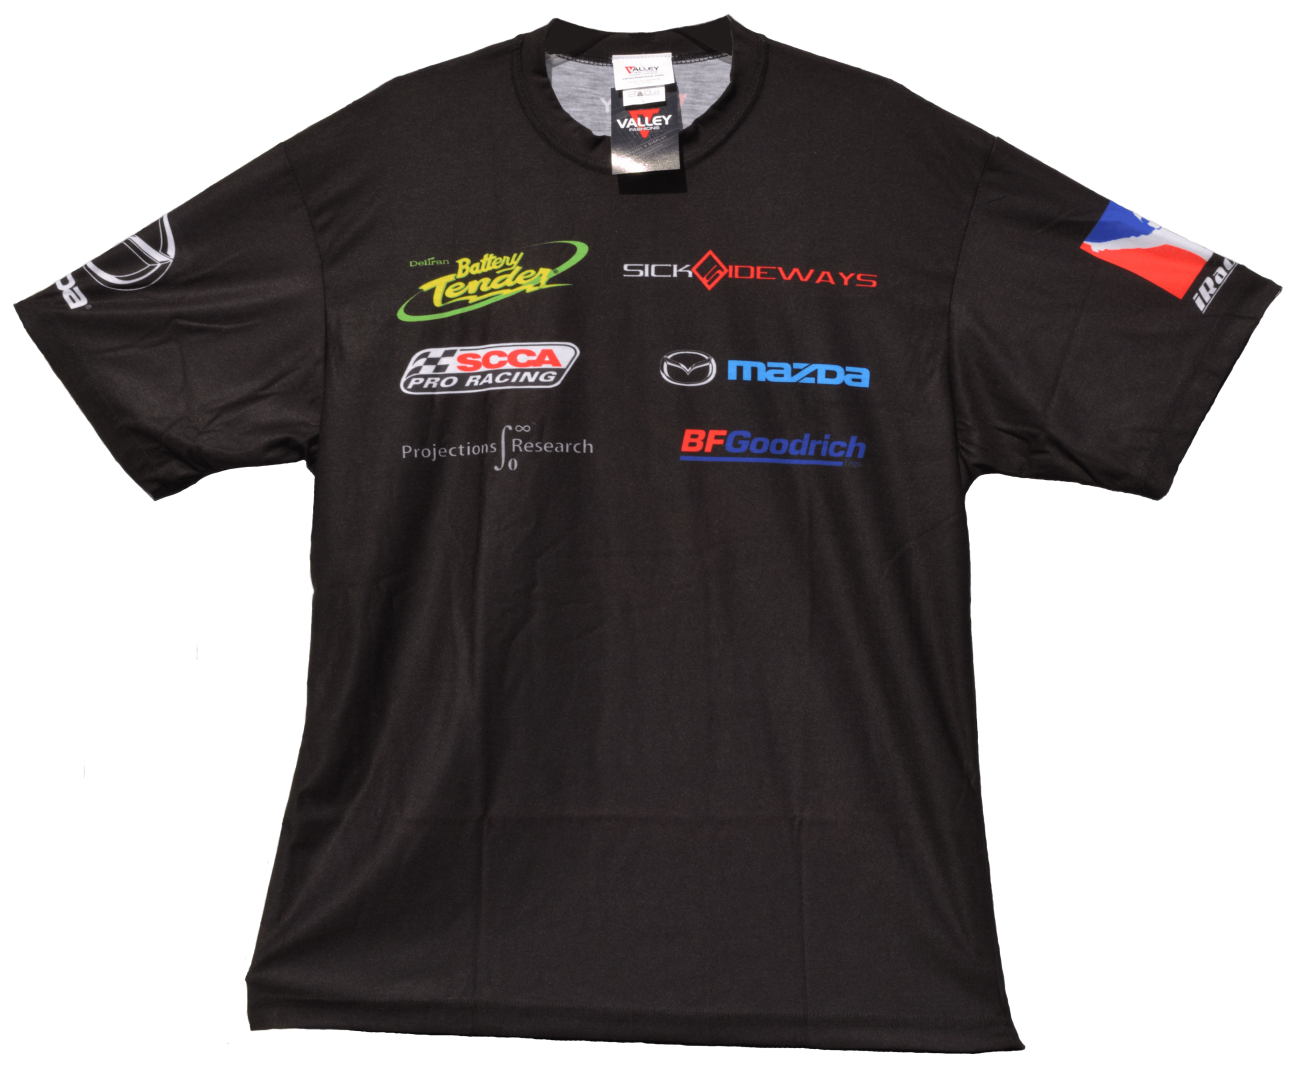 Sick Sideways Racing Shirt with SSR Logo and Sponsors Logos (Large Size ...